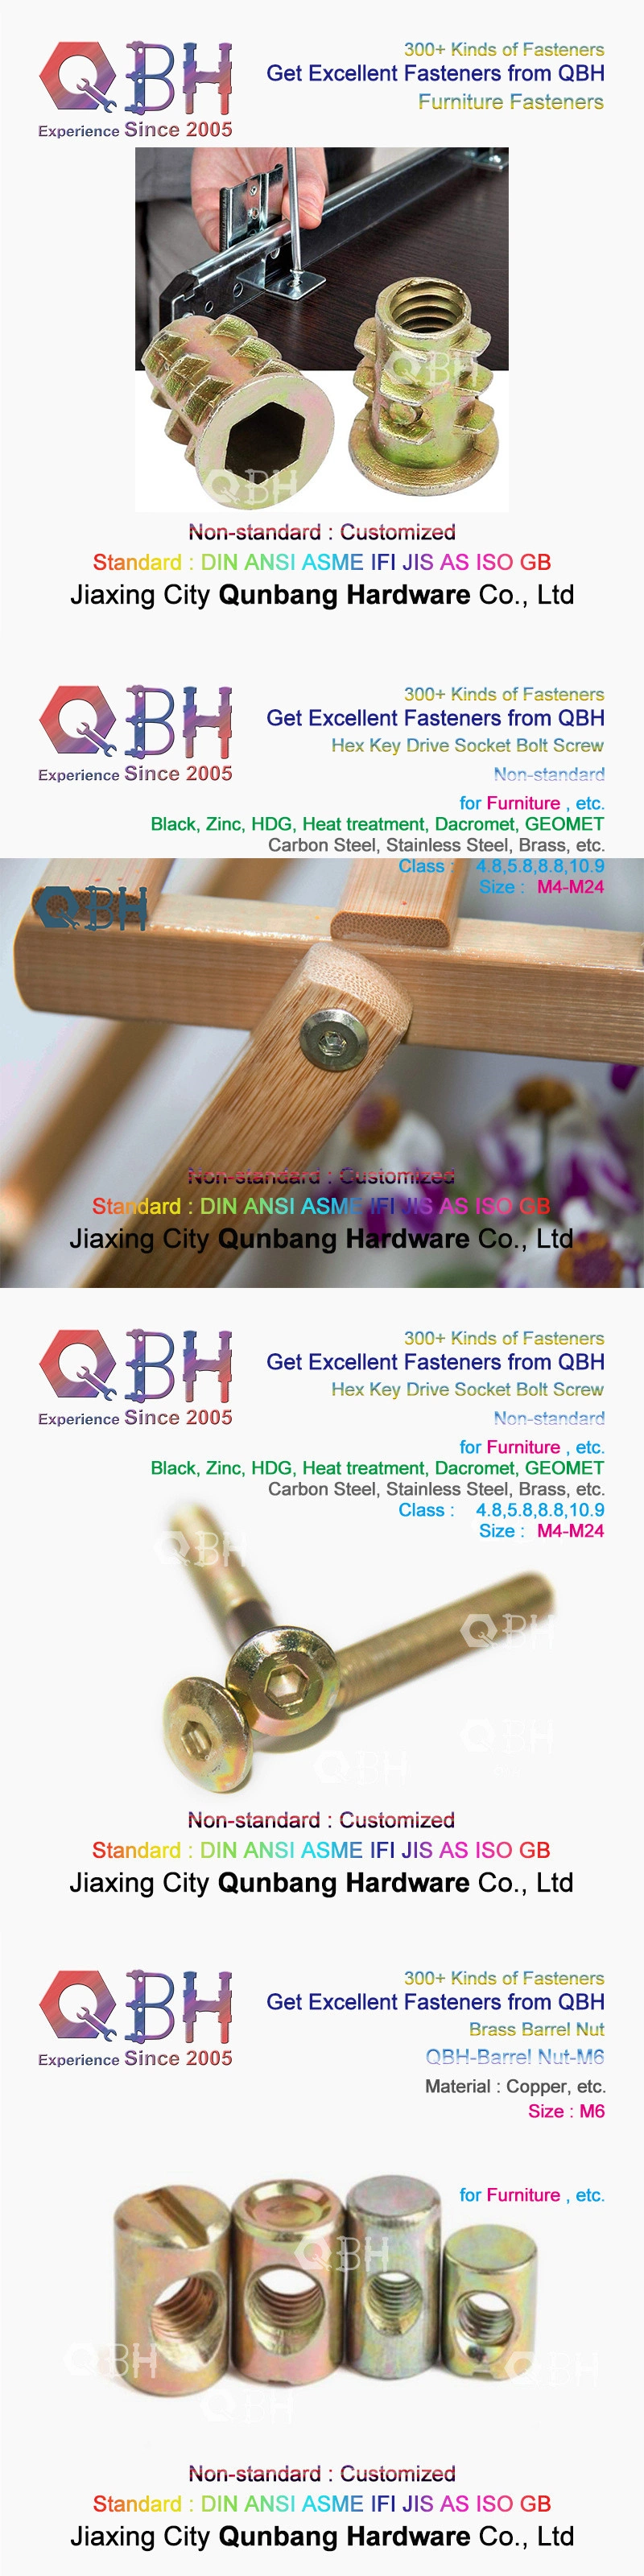 Qbh 15+ Years 300+ Furniture Industrial Steel Structure Construction Bridge Railway Ship Solar Panel Building Material Boat Automotive Auto Fastener Hardware